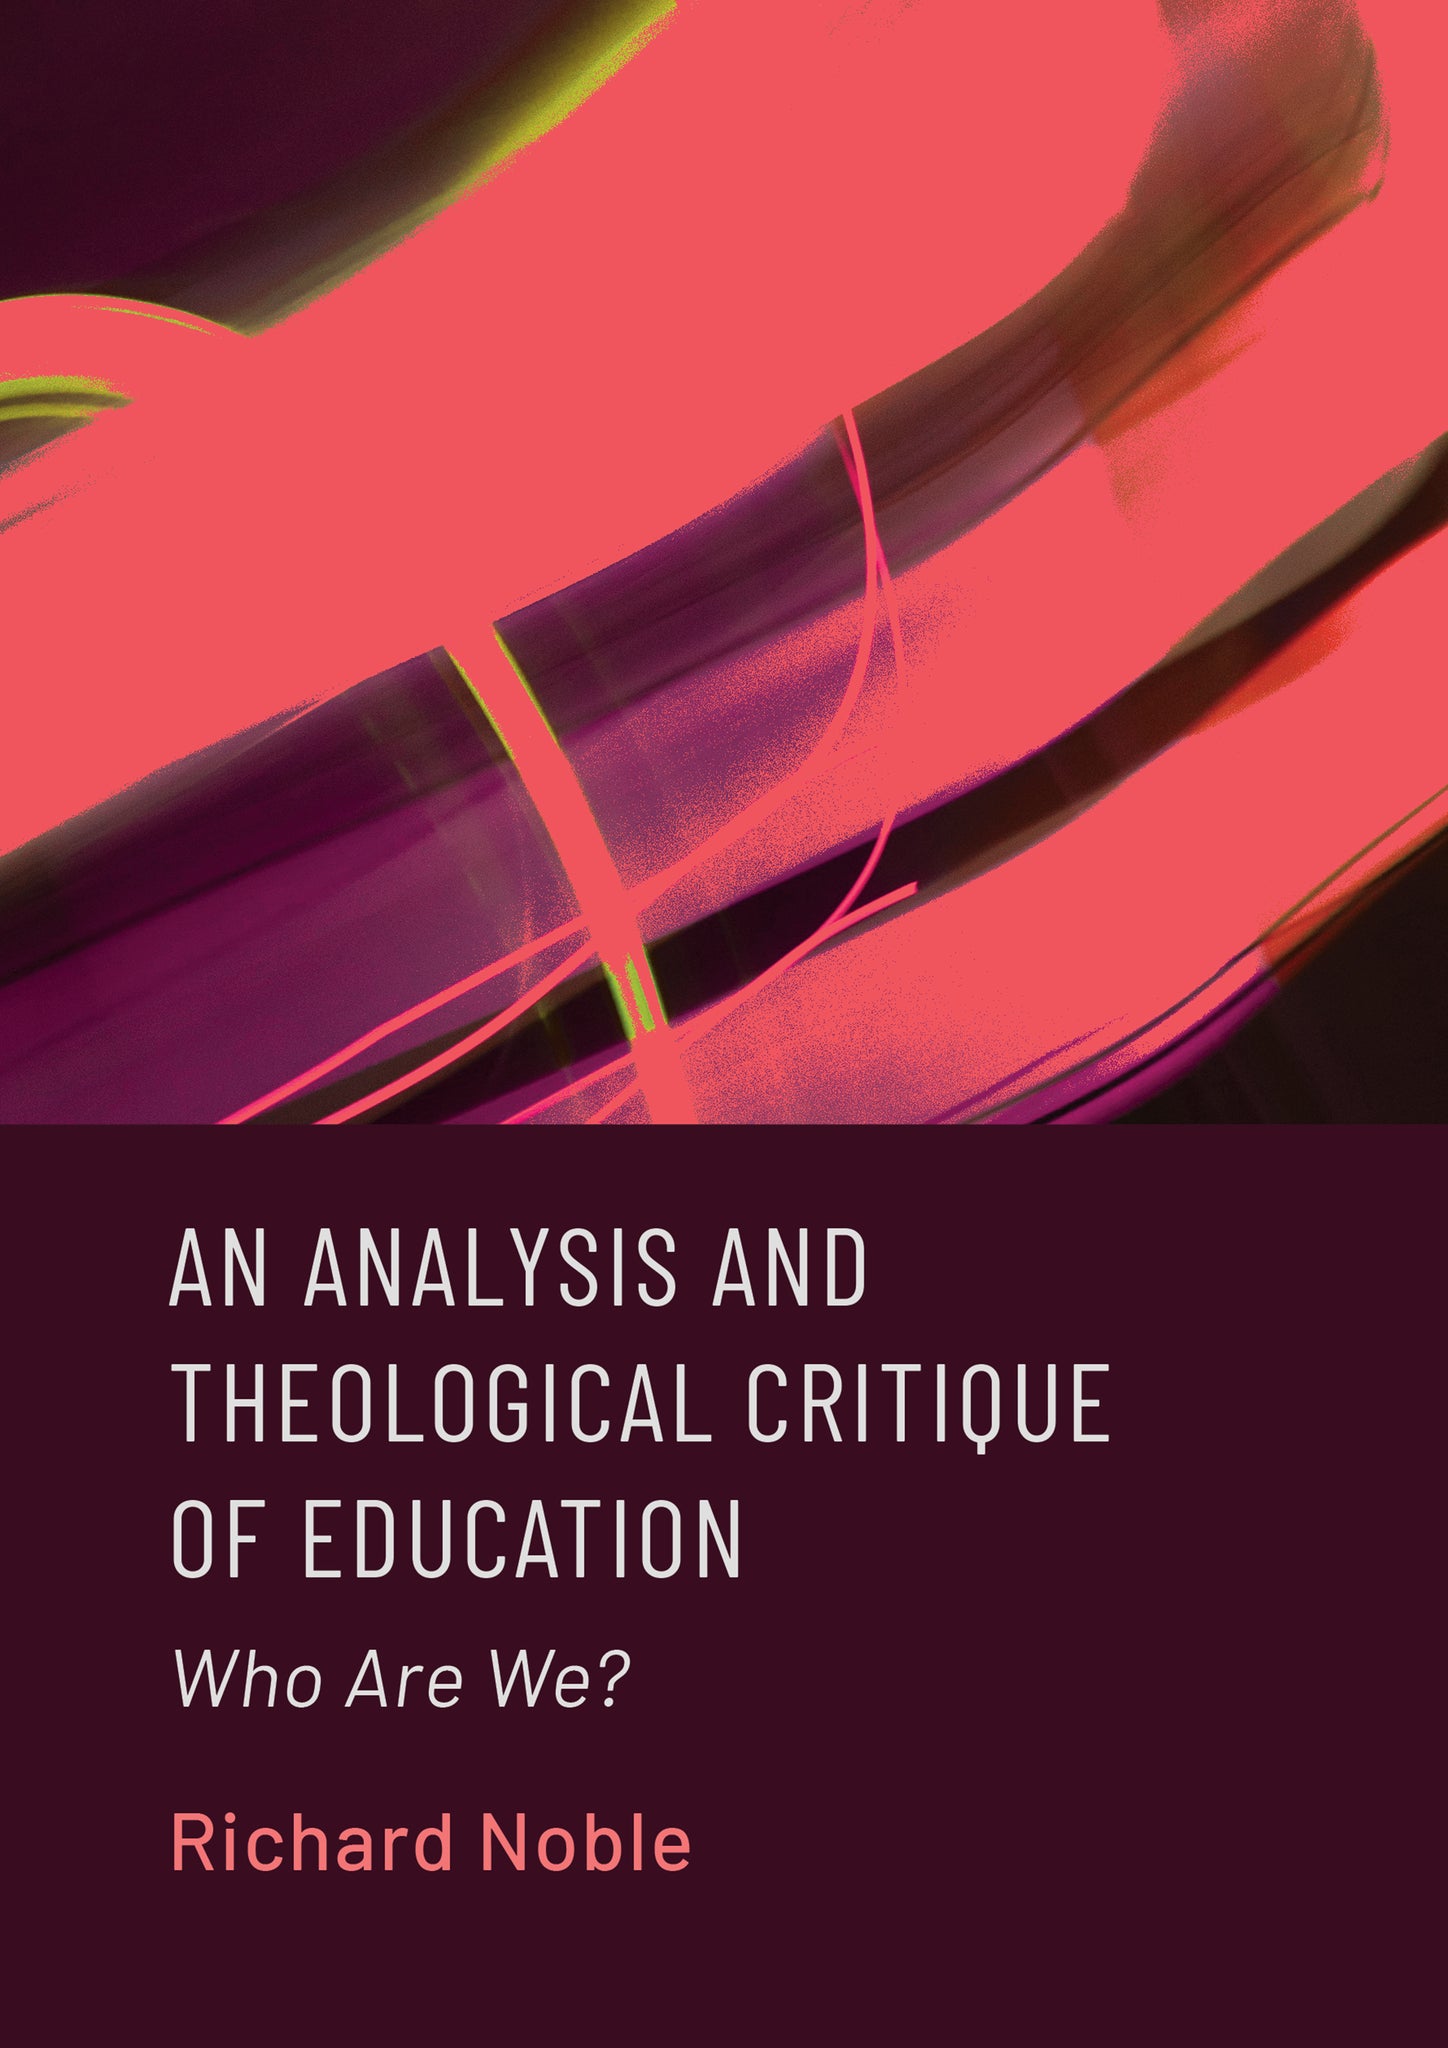 An Analysis and Theological Critique of Education: Who Are We?